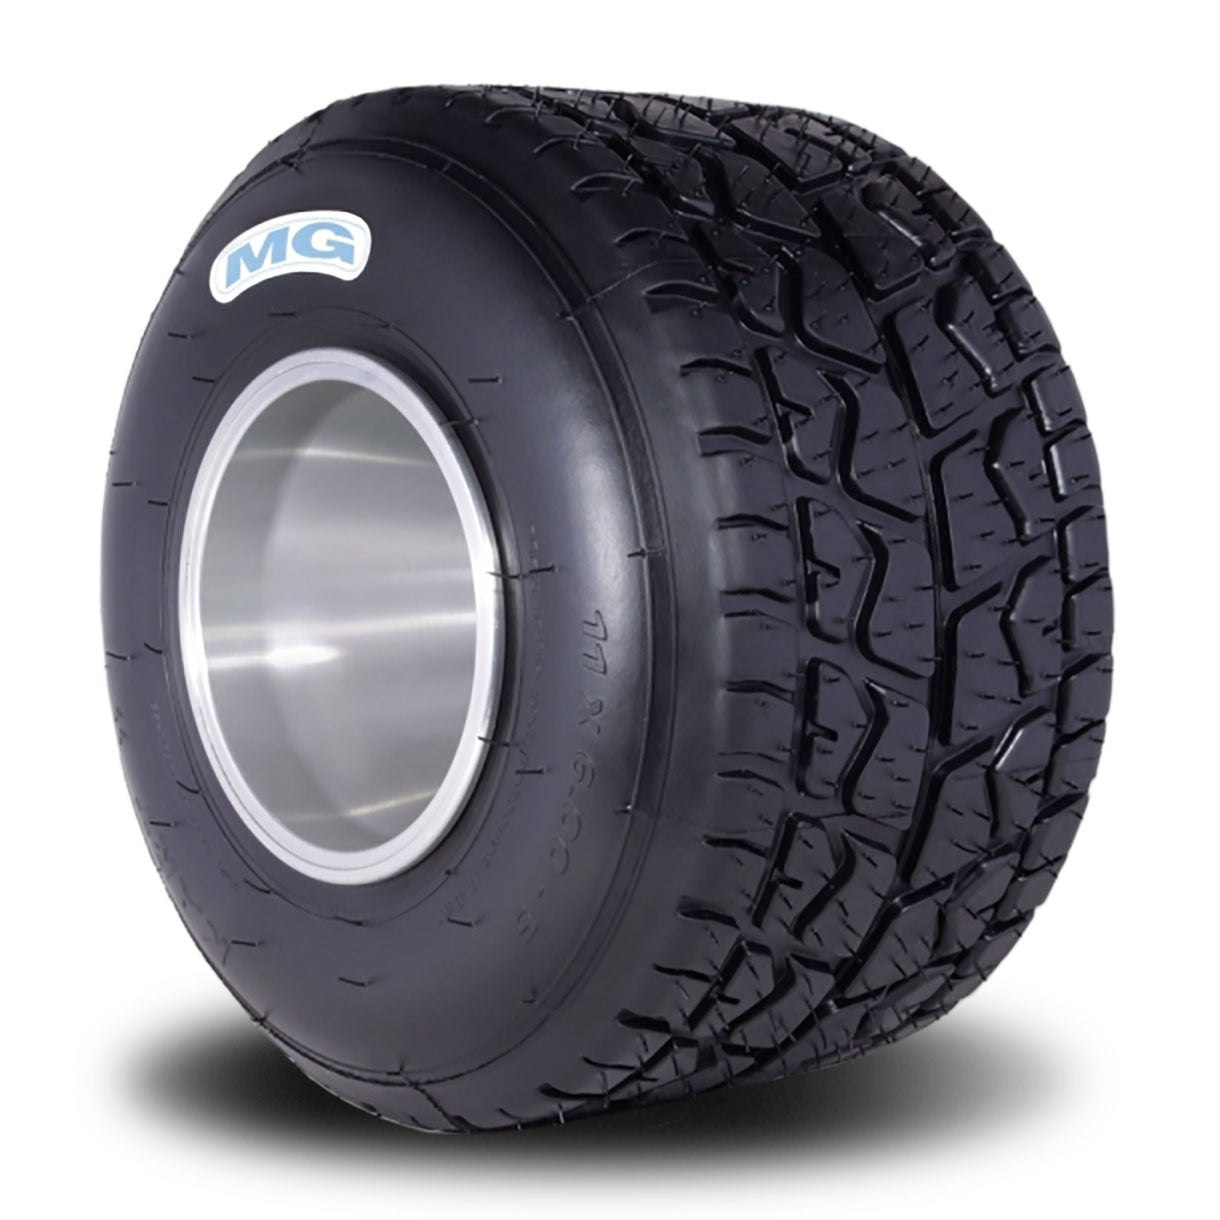 Dirt Tyres for Go Kart Racing by MG Tires